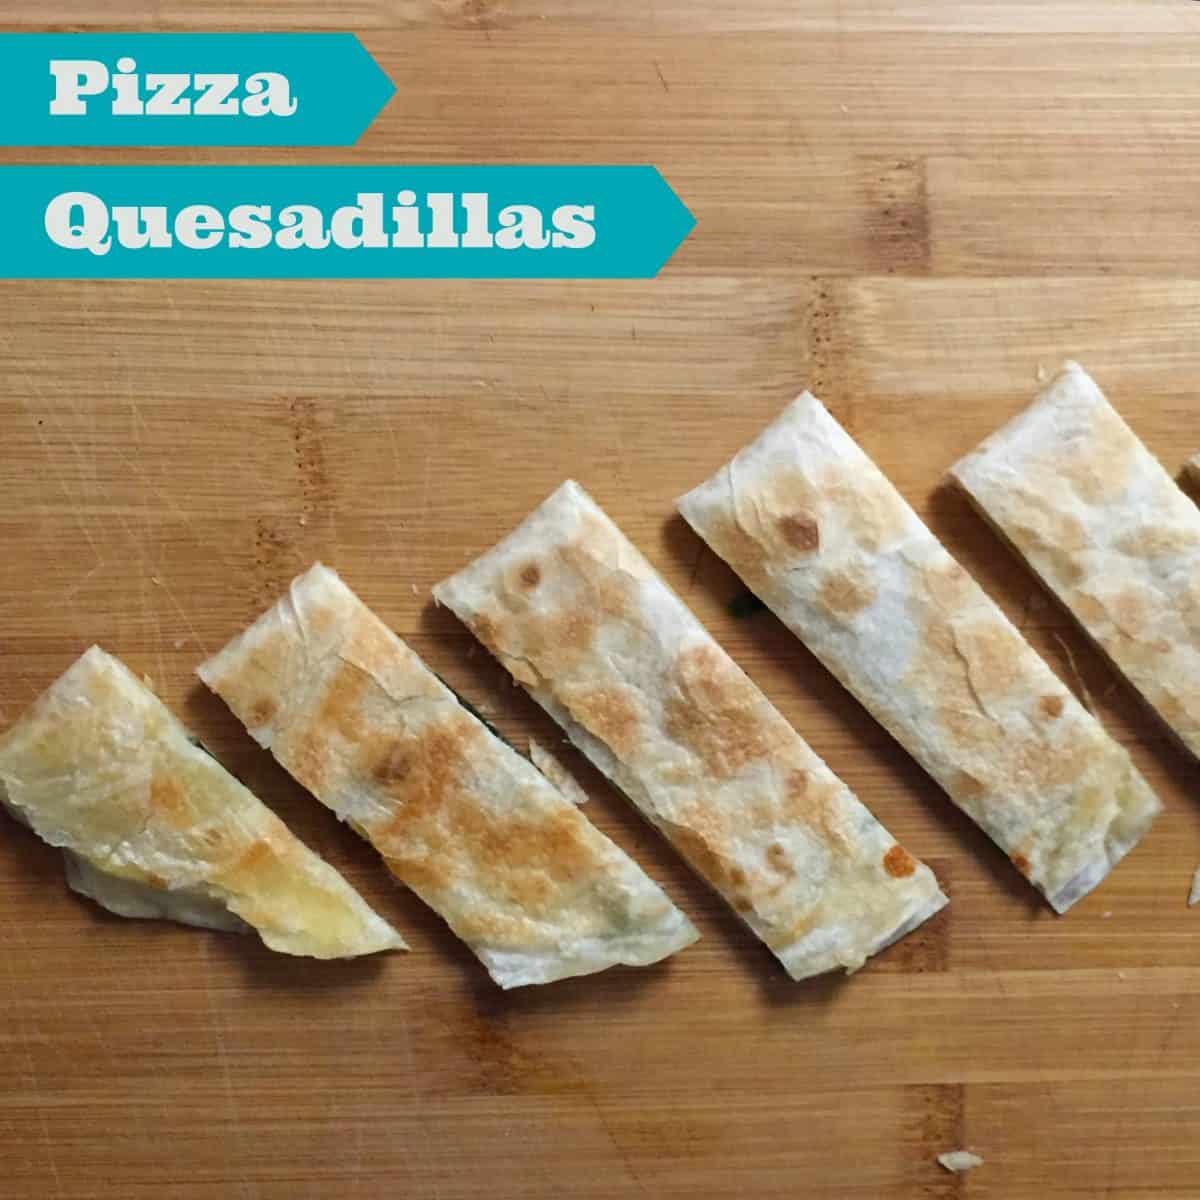 Waste free lunchbox ideas. Pizza Quesadillas and Gamer Carrots! Make a fast fun lunch for your kids.